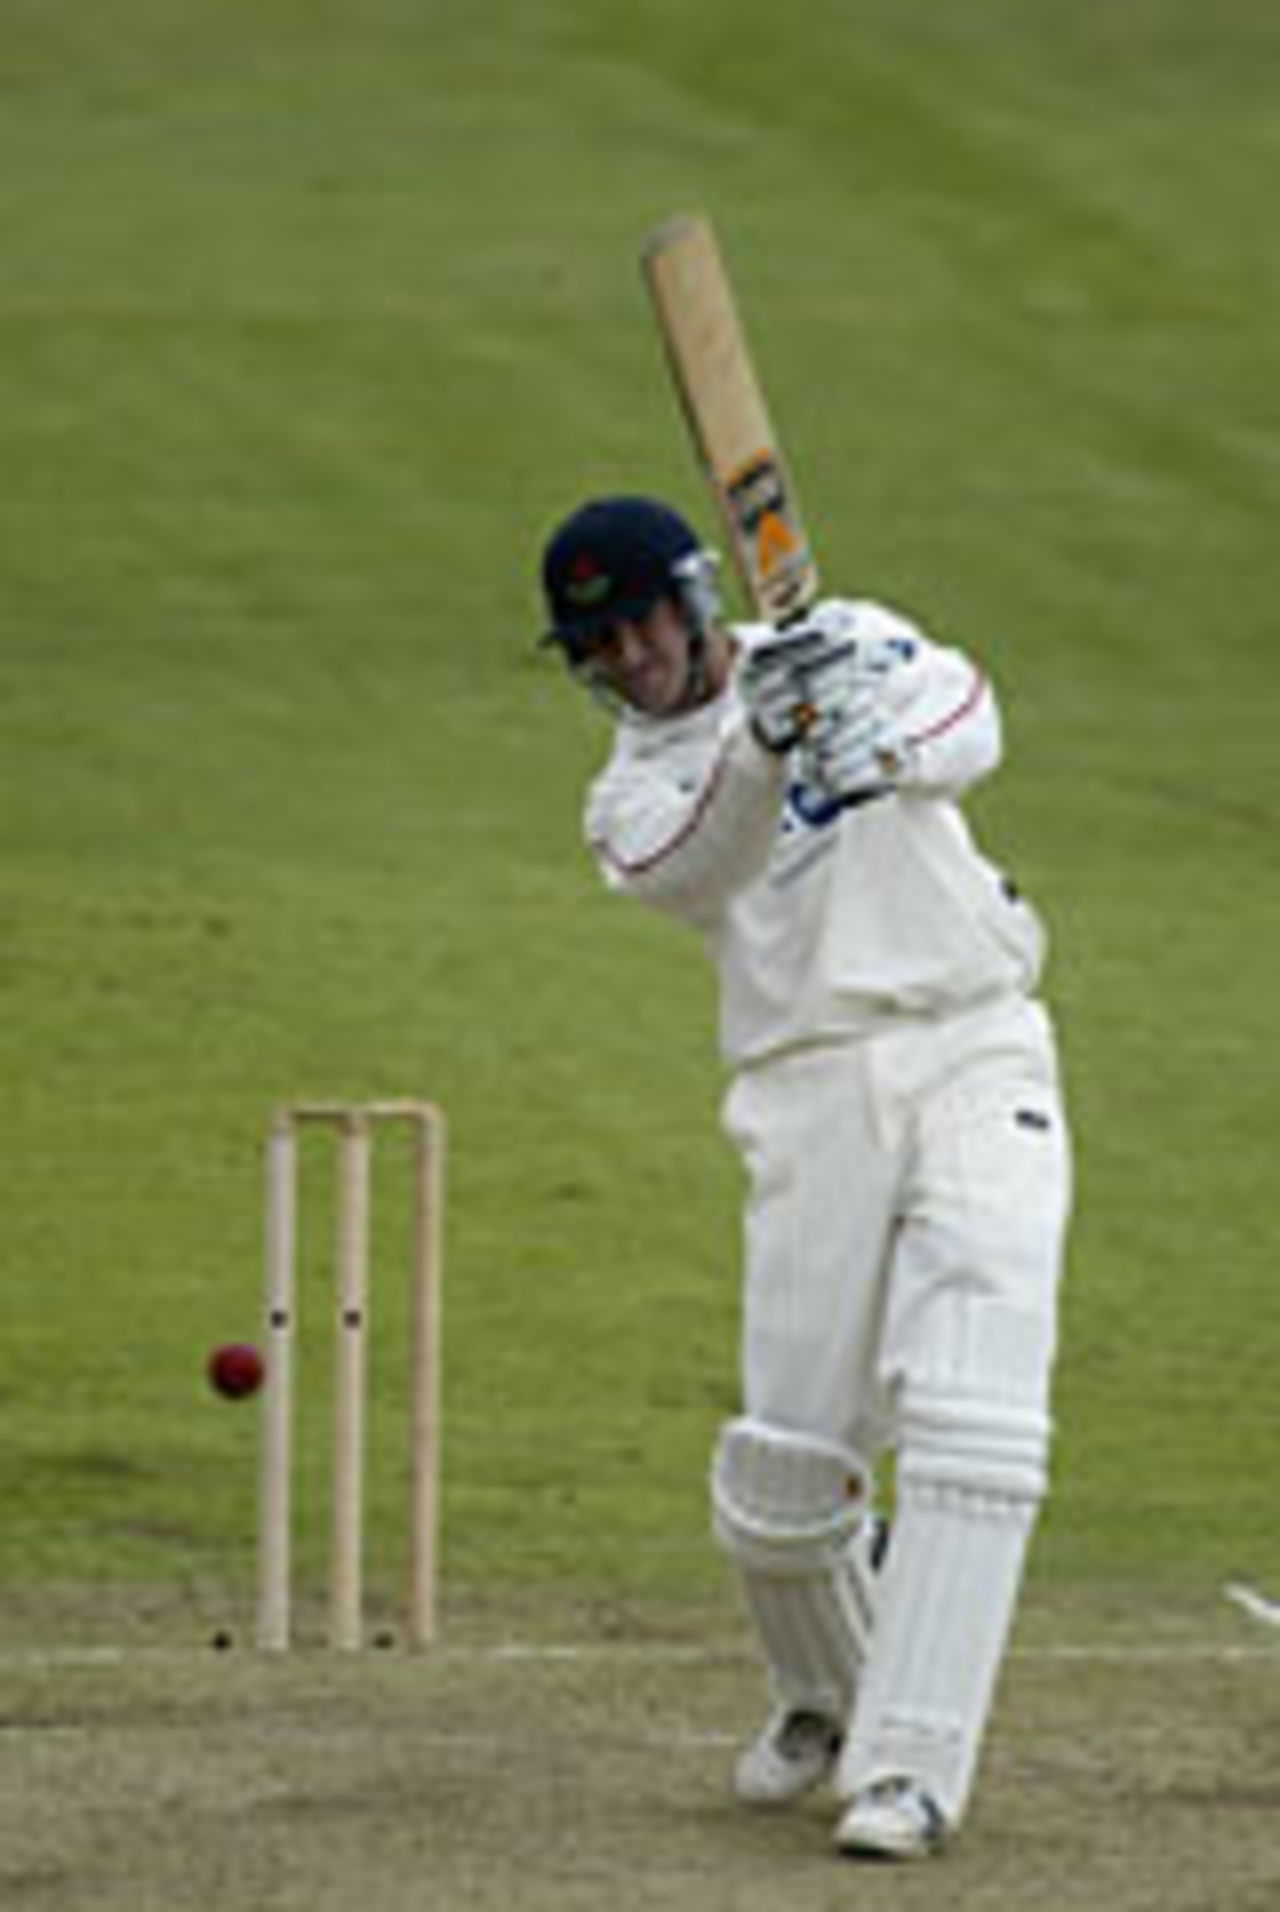 Mark Chilton on his way to 101 for Lancashire against Warickshire in a B&H semi at Old Trafford, June 7 2002